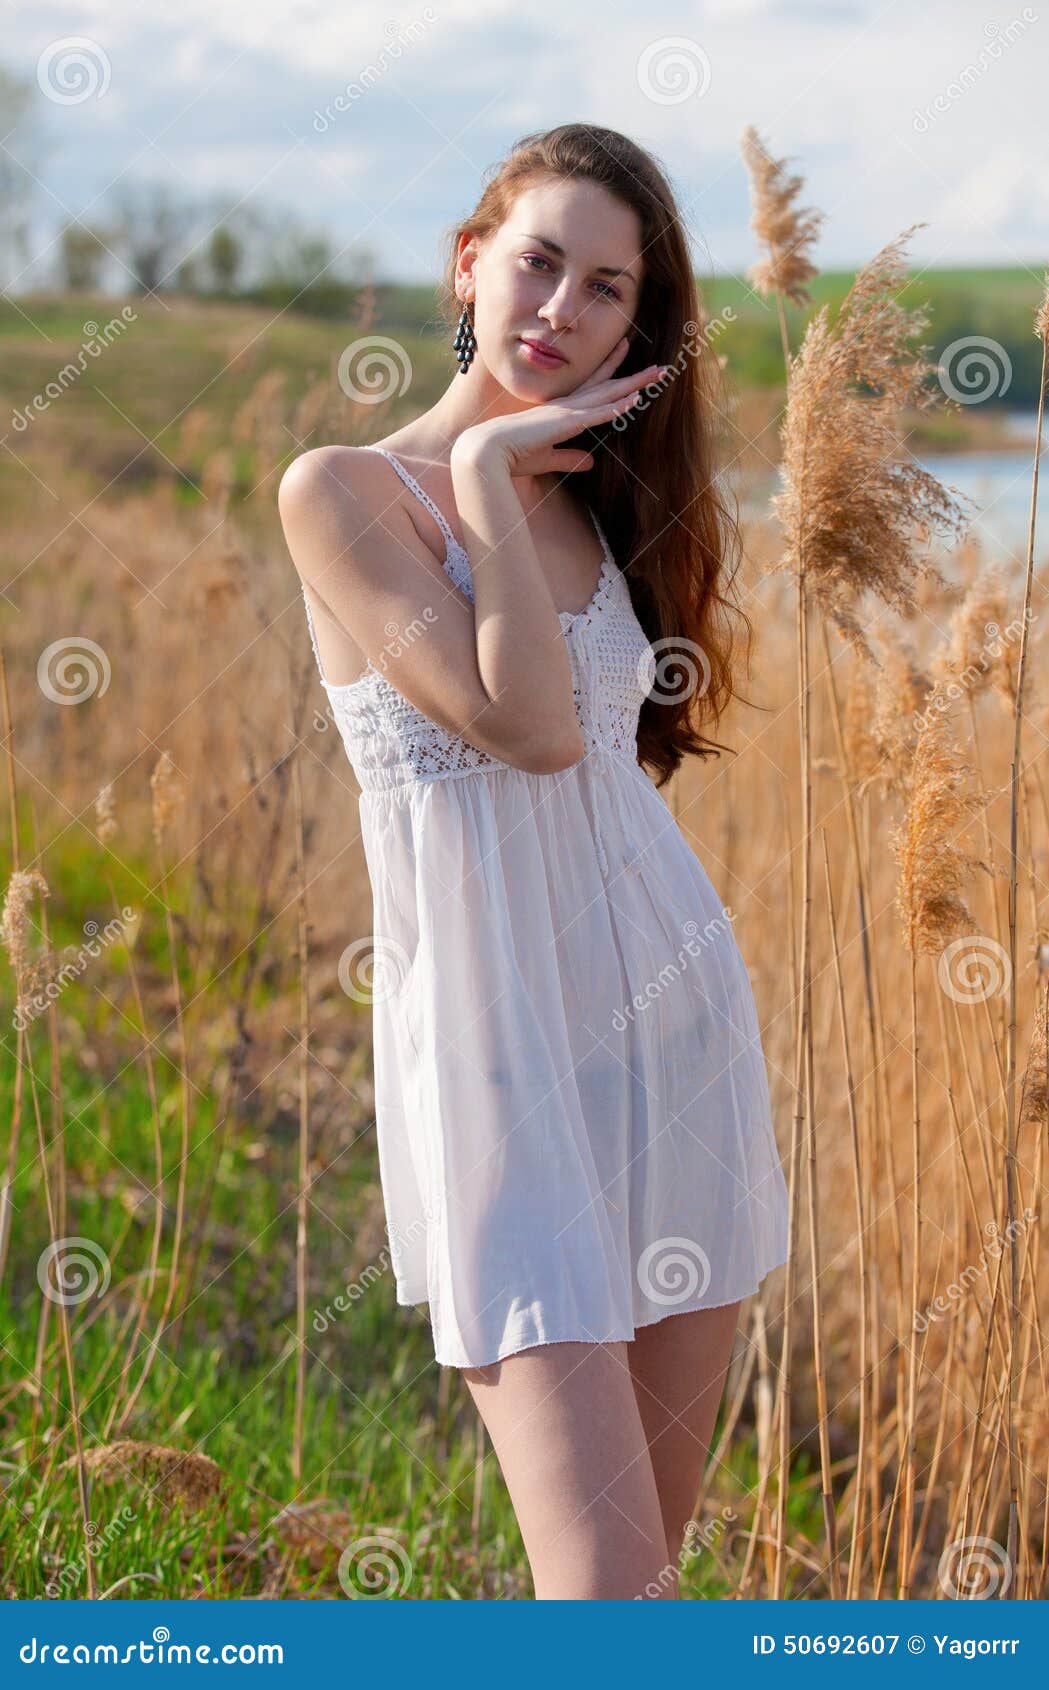 Beautiful Girl in the Reeds Stock Image - Image of summer, dress: 50692607